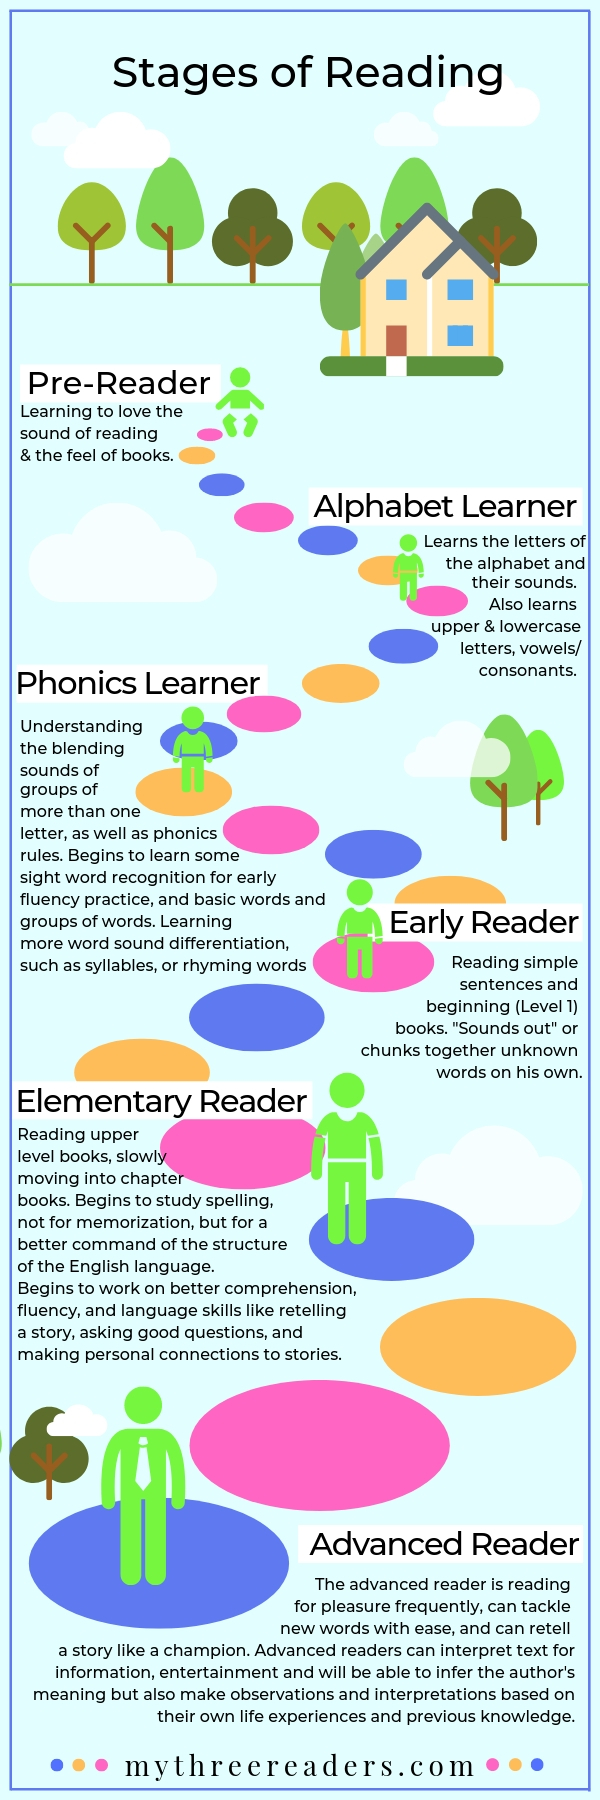 Stages of Learning to Read